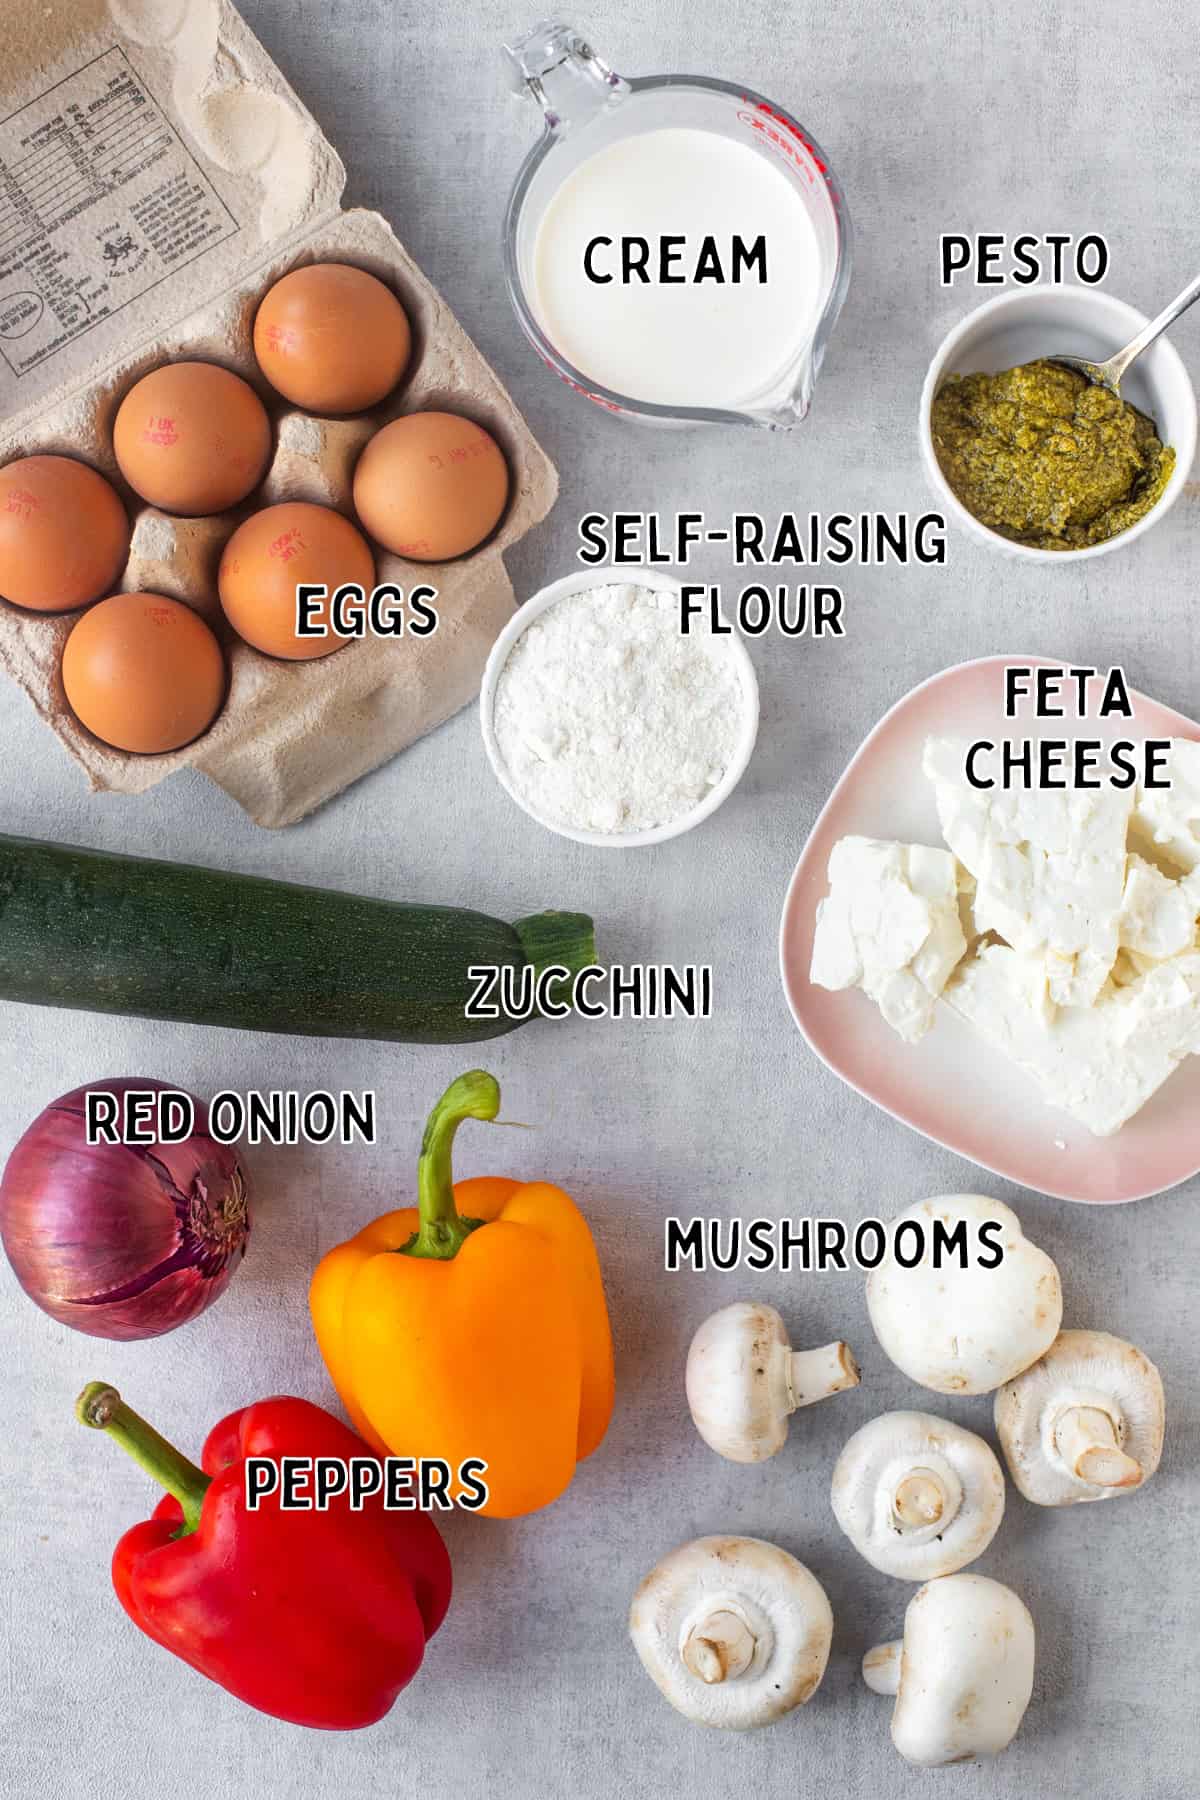 Ingredients for feta and roasted vegetable crustless quiche laid out with text overlay.